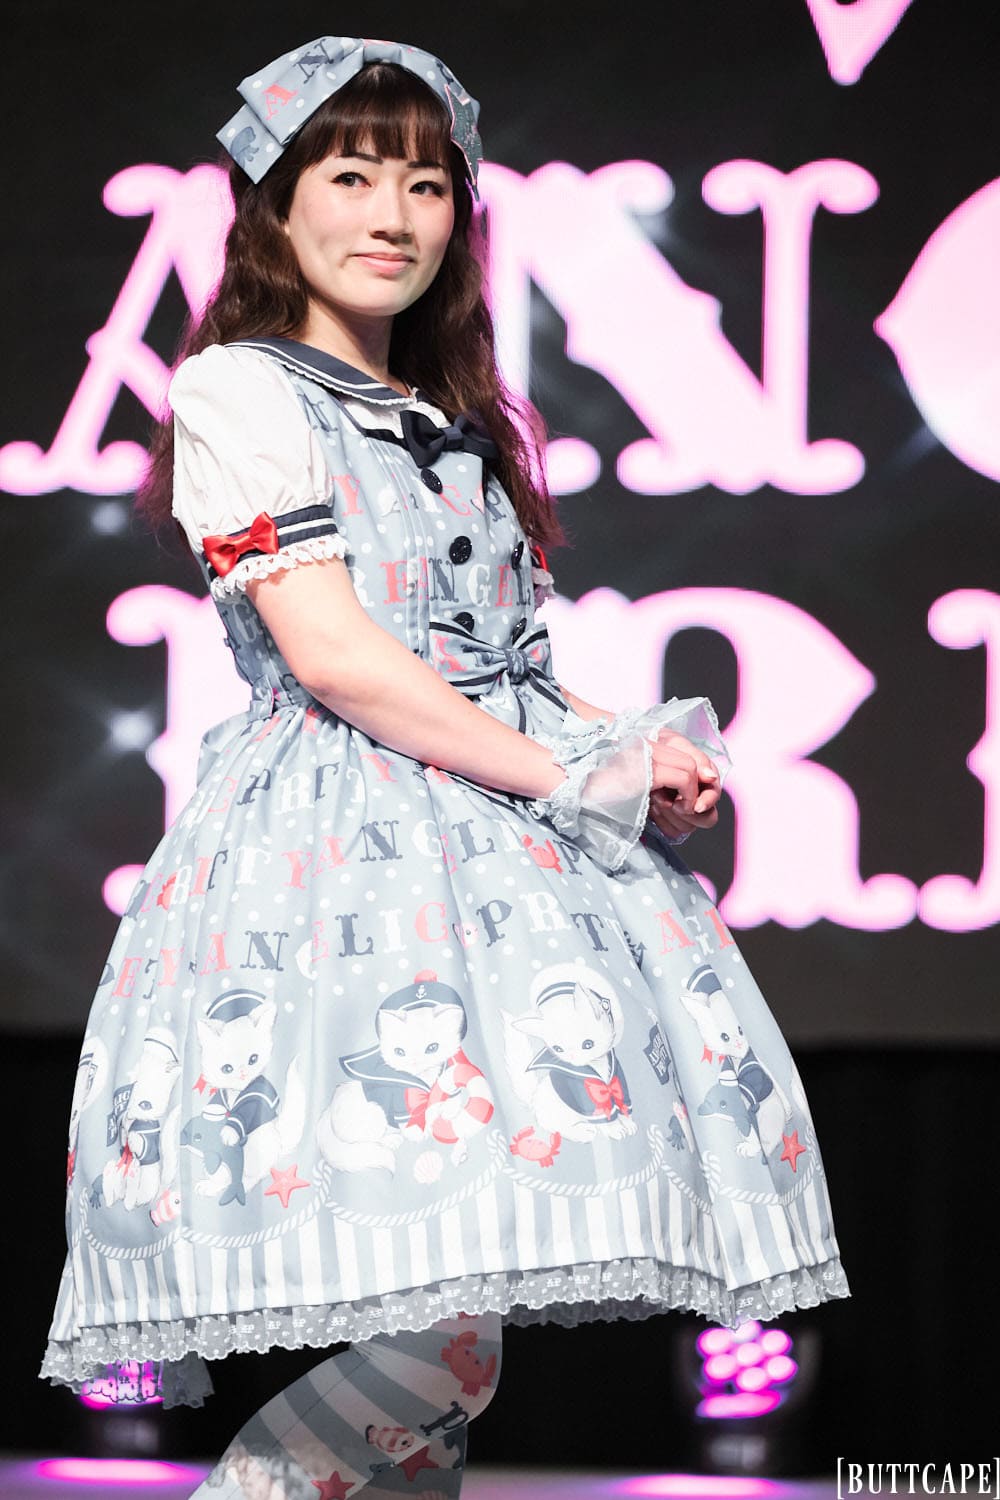 Model 8 wearing grey sailor outfit with cats and stripes - half body 1.